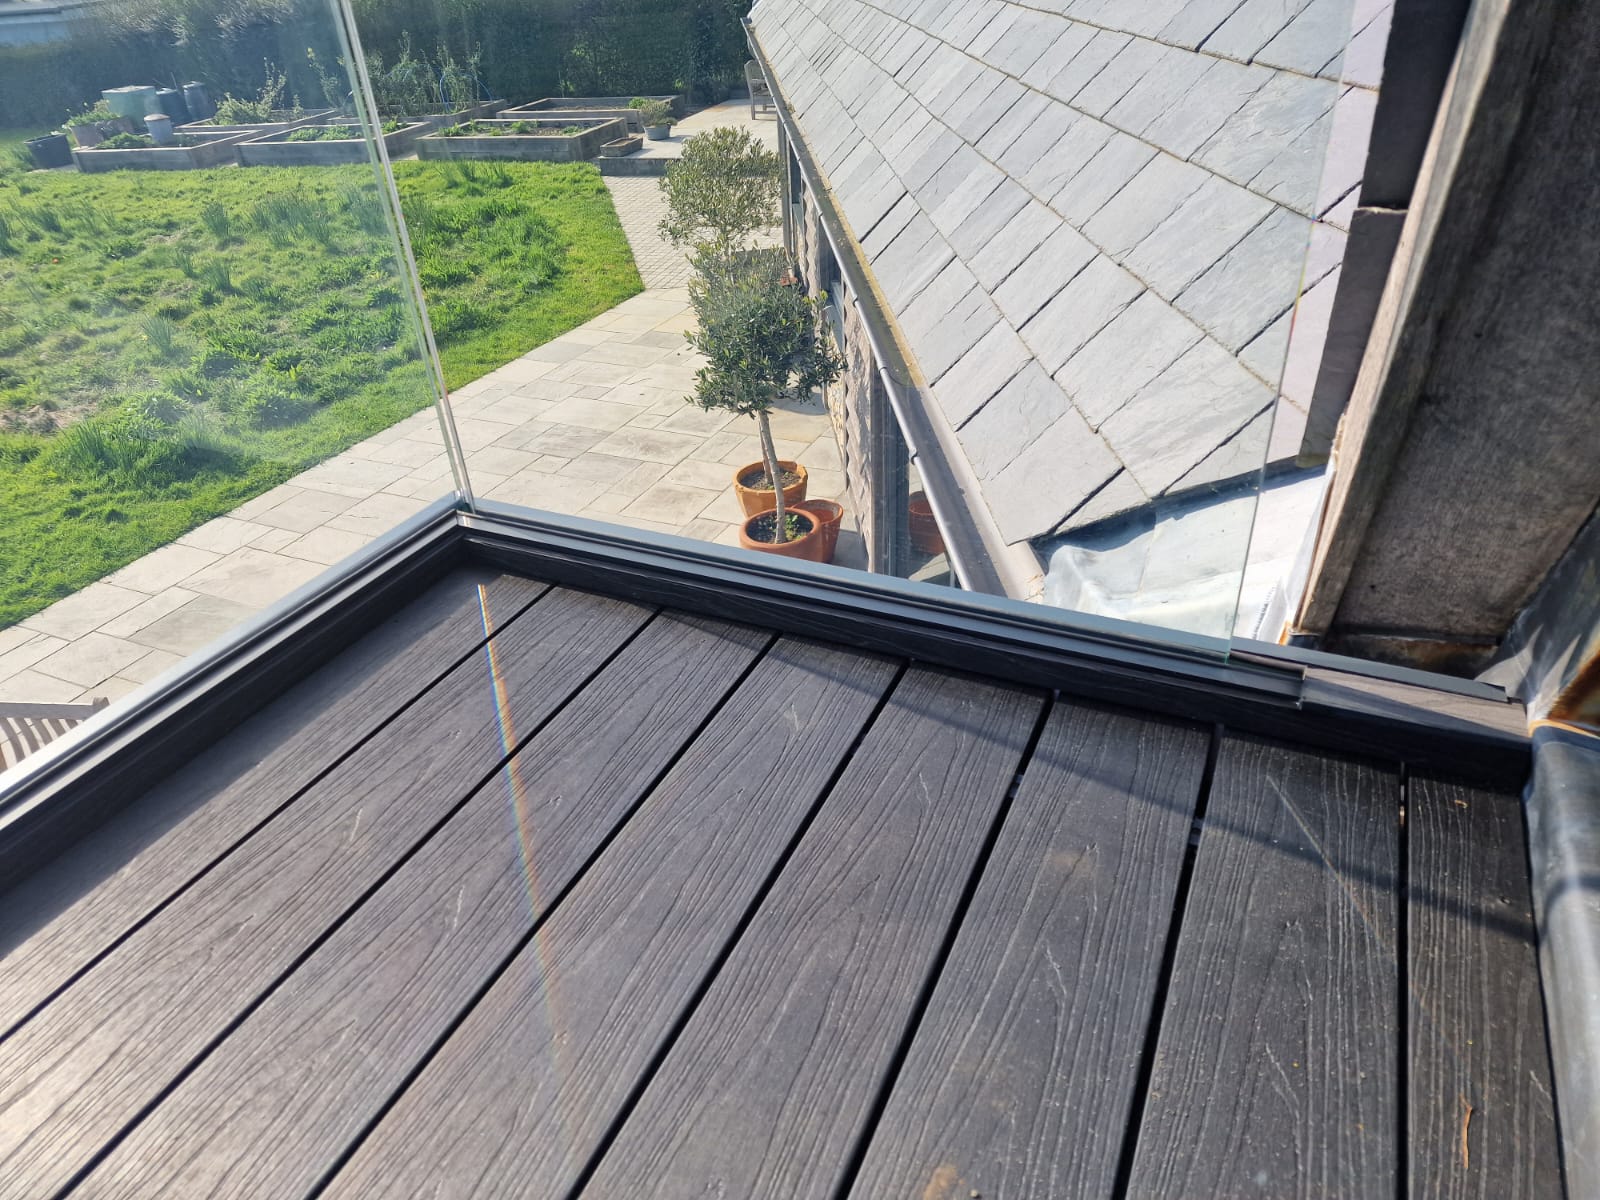 Fully Frameless Glass Balustrade installed for a private client in buxted, includes balcony facia covers in RAL7016 Showing decking by NeoTimber